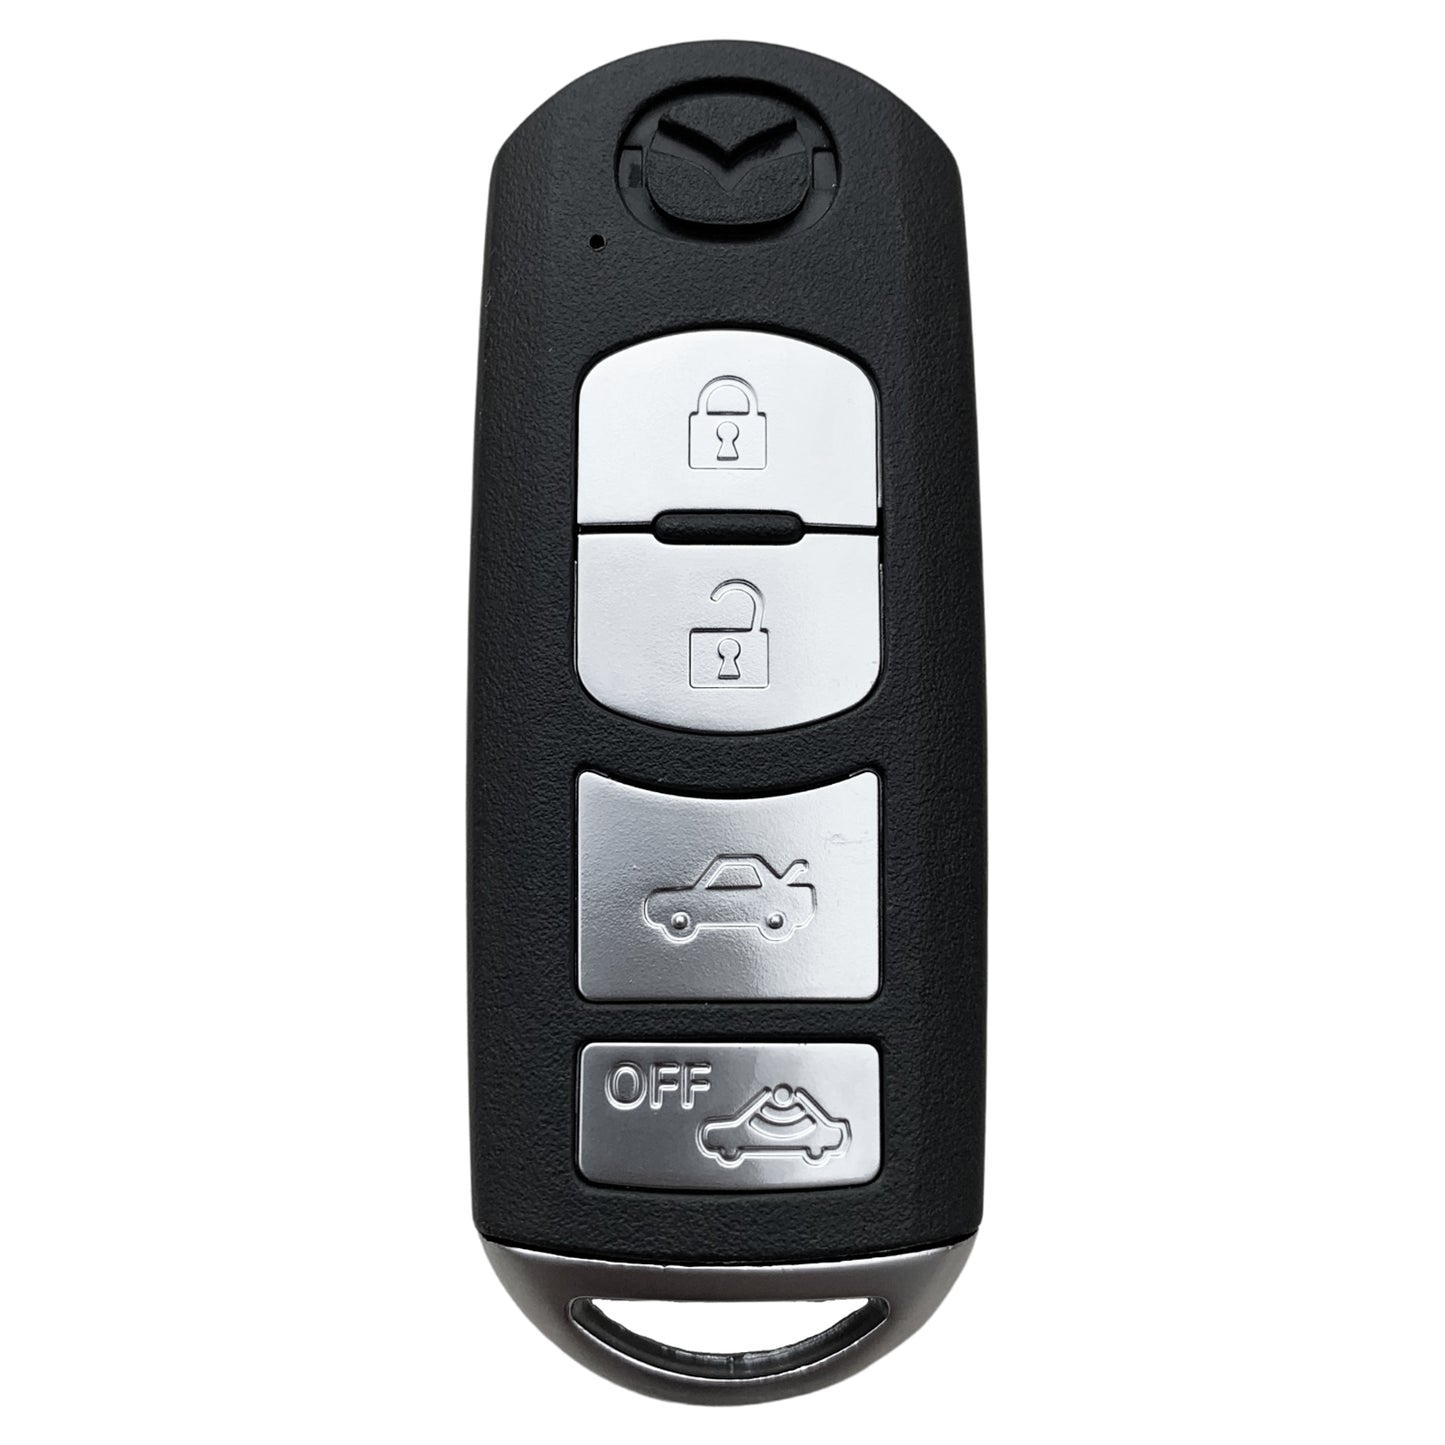 Aftermarket 4 Button Smart Remote for Mazda